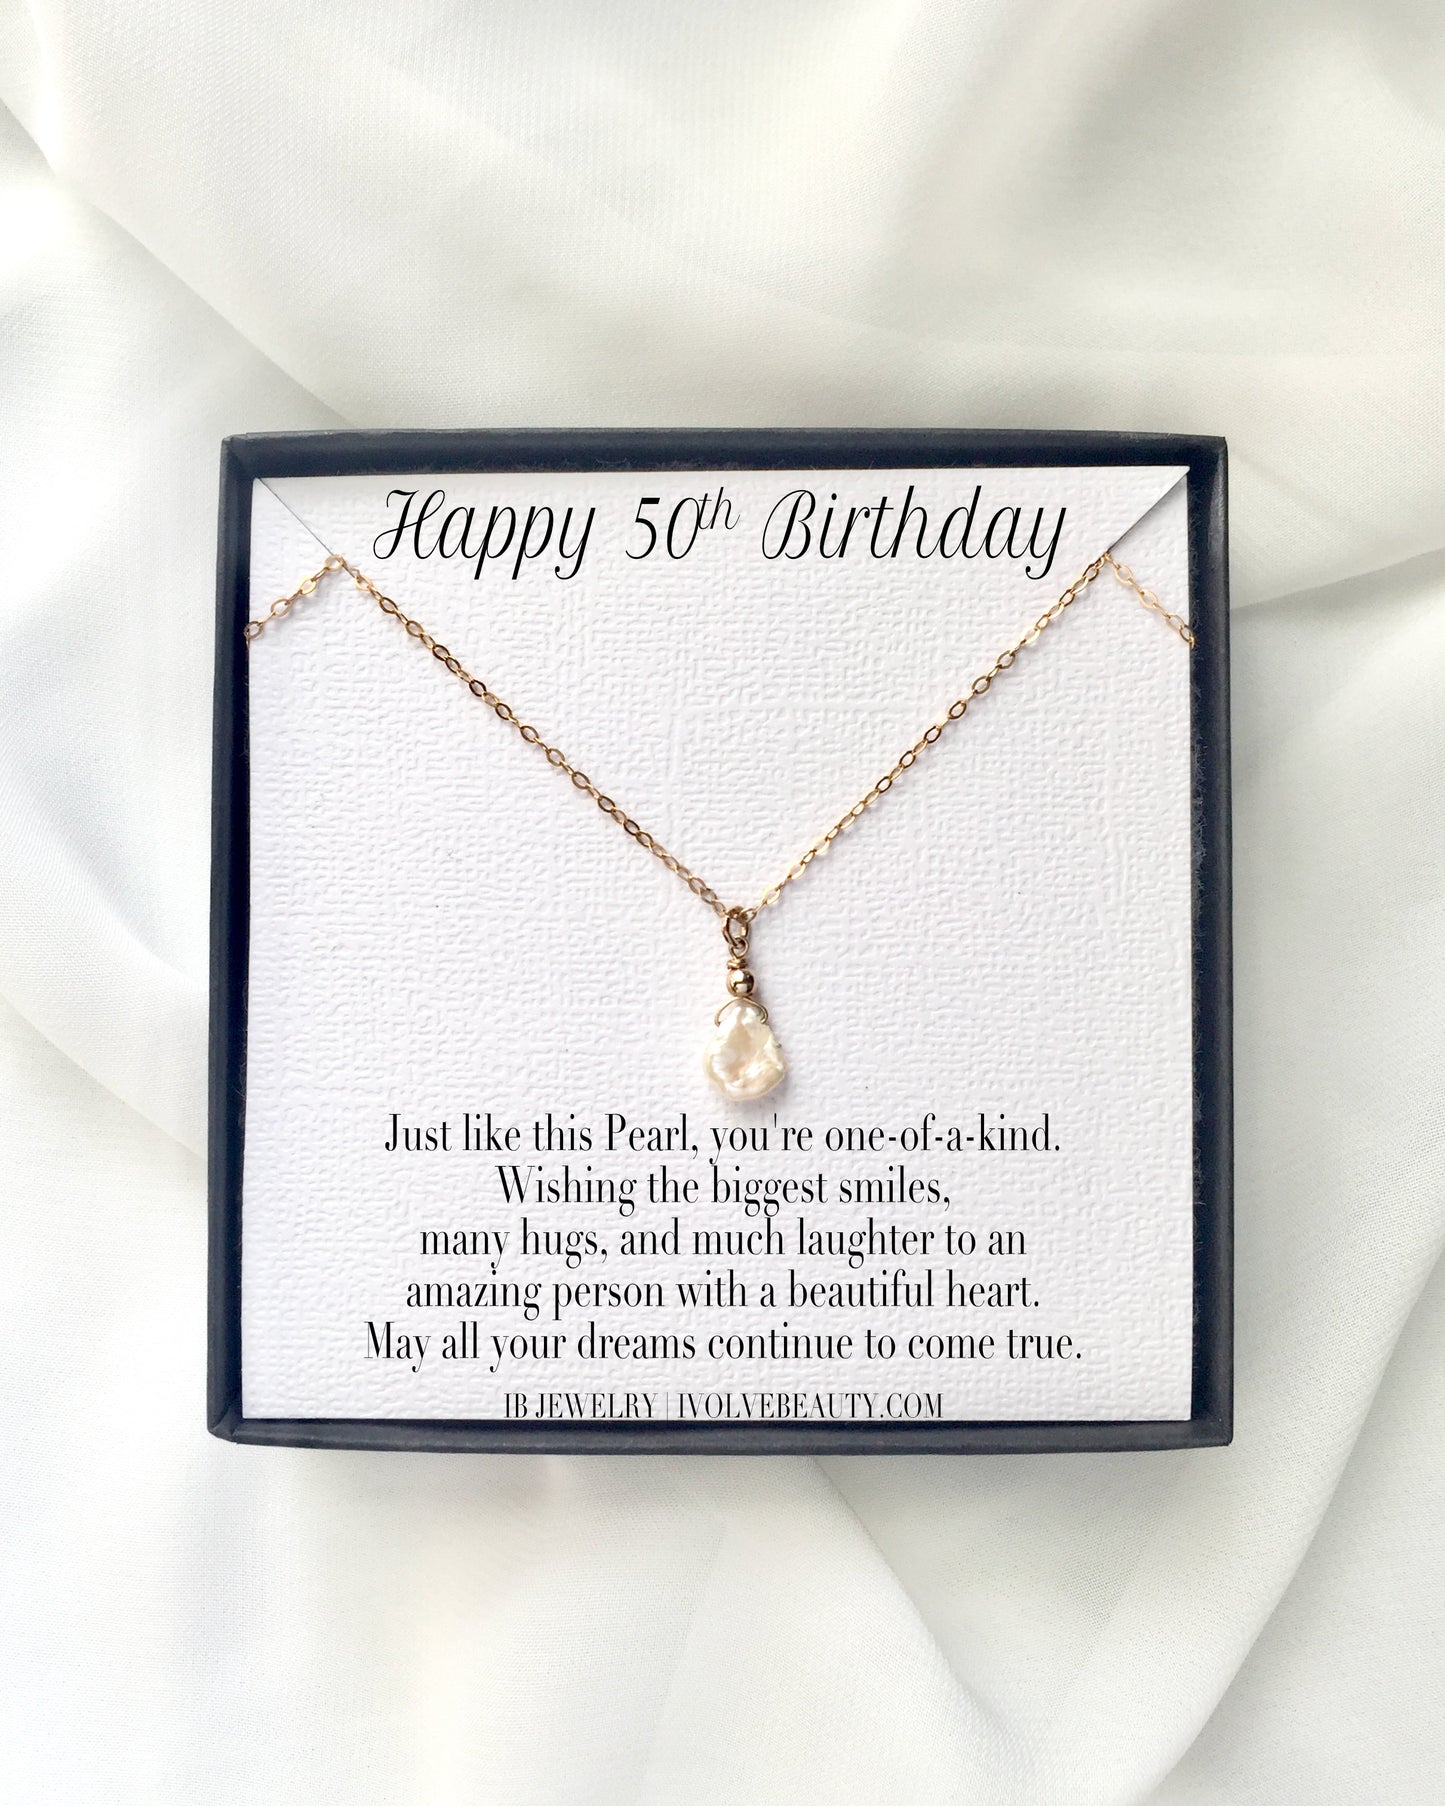 50th Birthday Necklace | 50th Birthday Jewelry For Mom Sister Aunt or Friend | Delicate Pearl Necklace | IB Jewelry